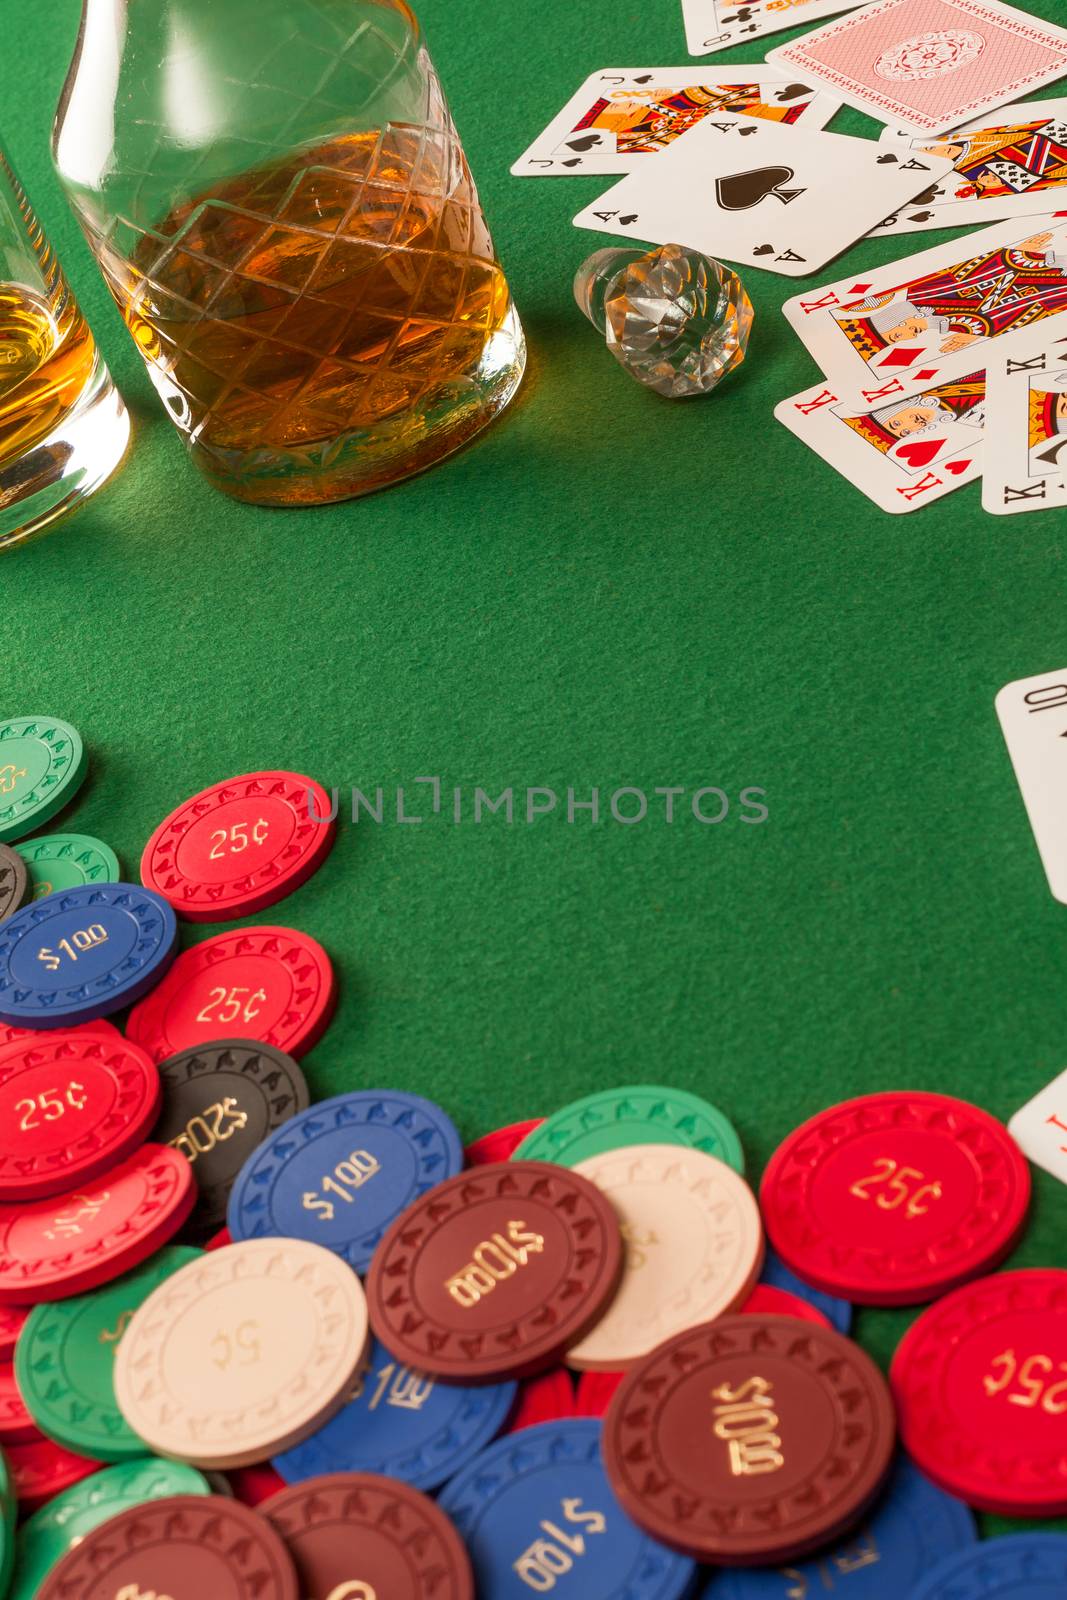 Photo of a poker table with gambling chips, cards and whisky.
